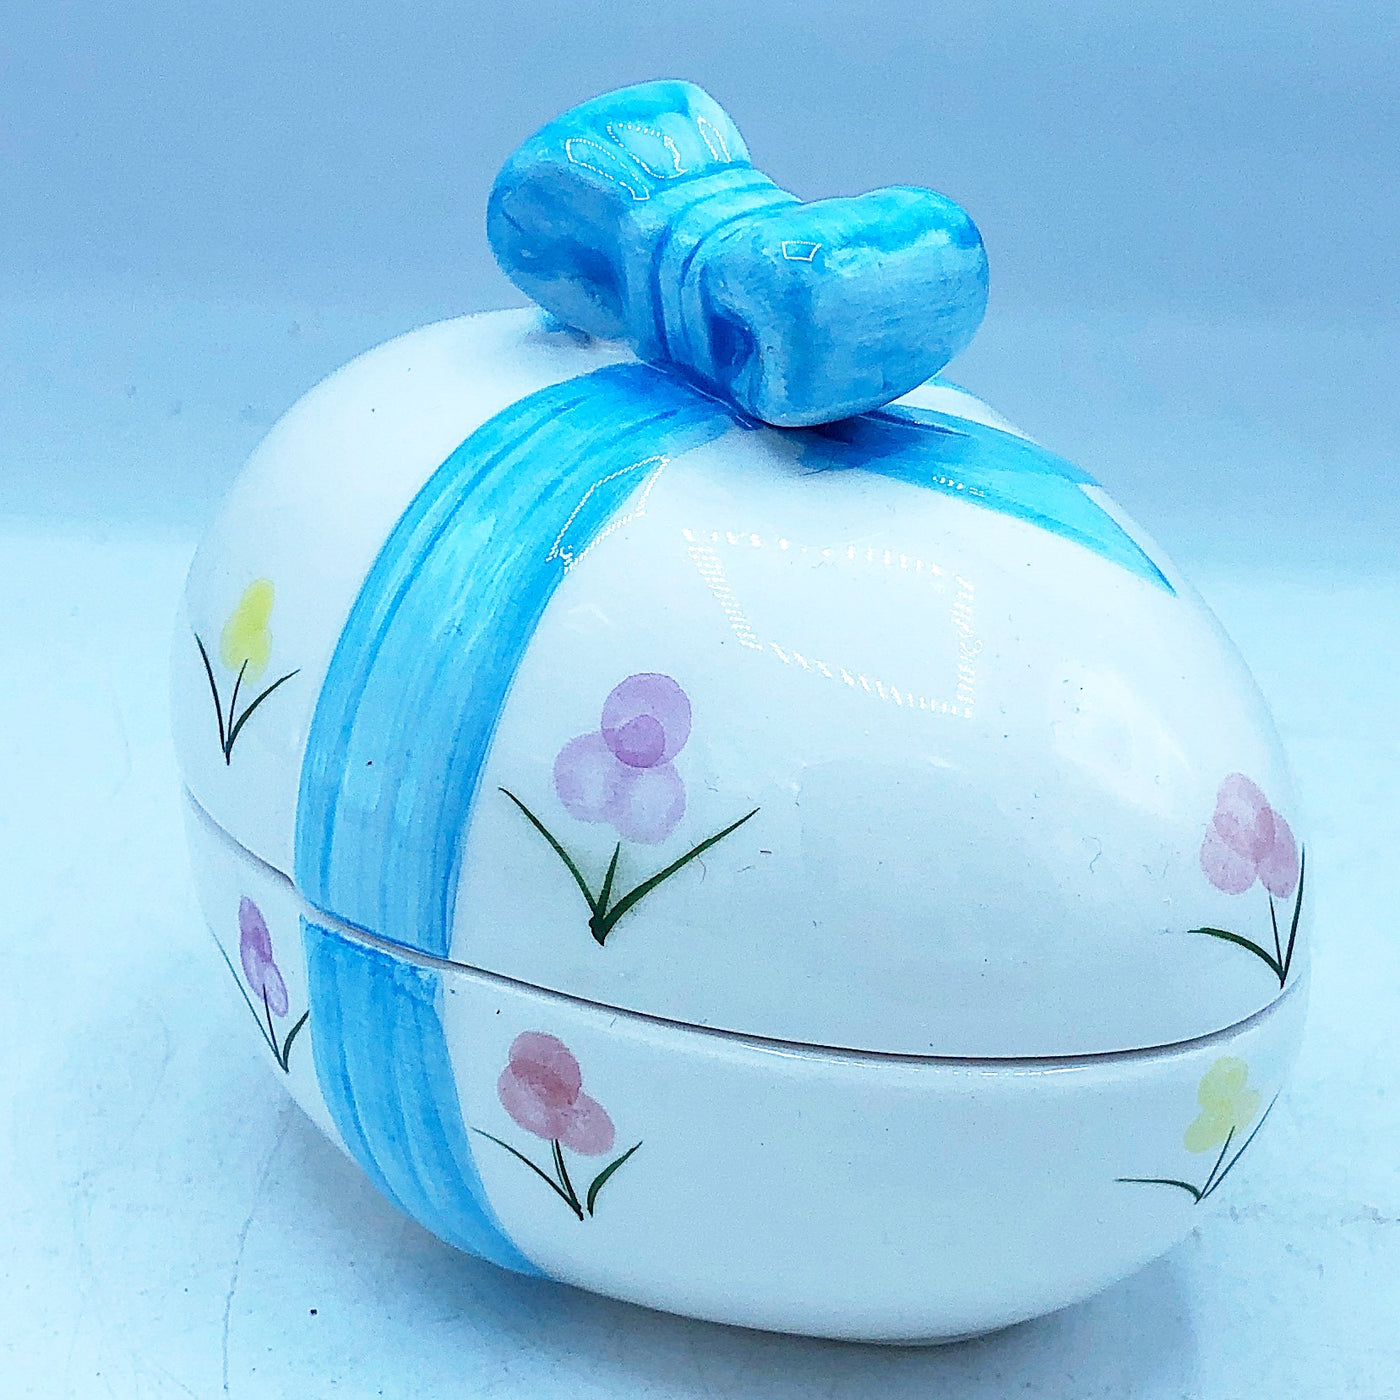 💙 Egg Shaped Trinket Box with Flowers and Blue Bow